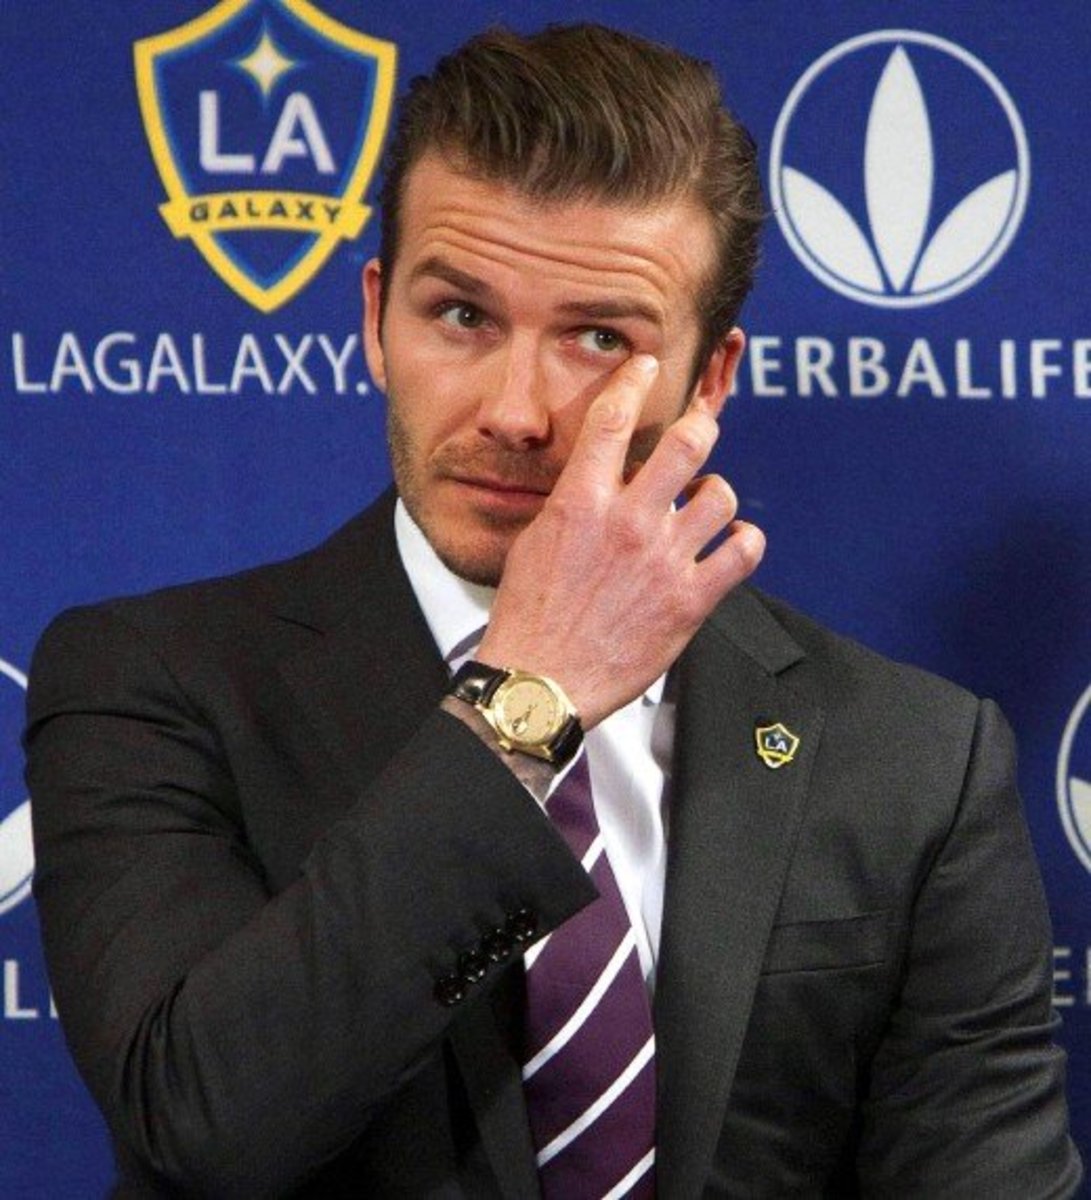 David Beckham has been seen sporting a plethora of different watches on his wrist during his years of fame, such as the beautiful, simple watch shown above.